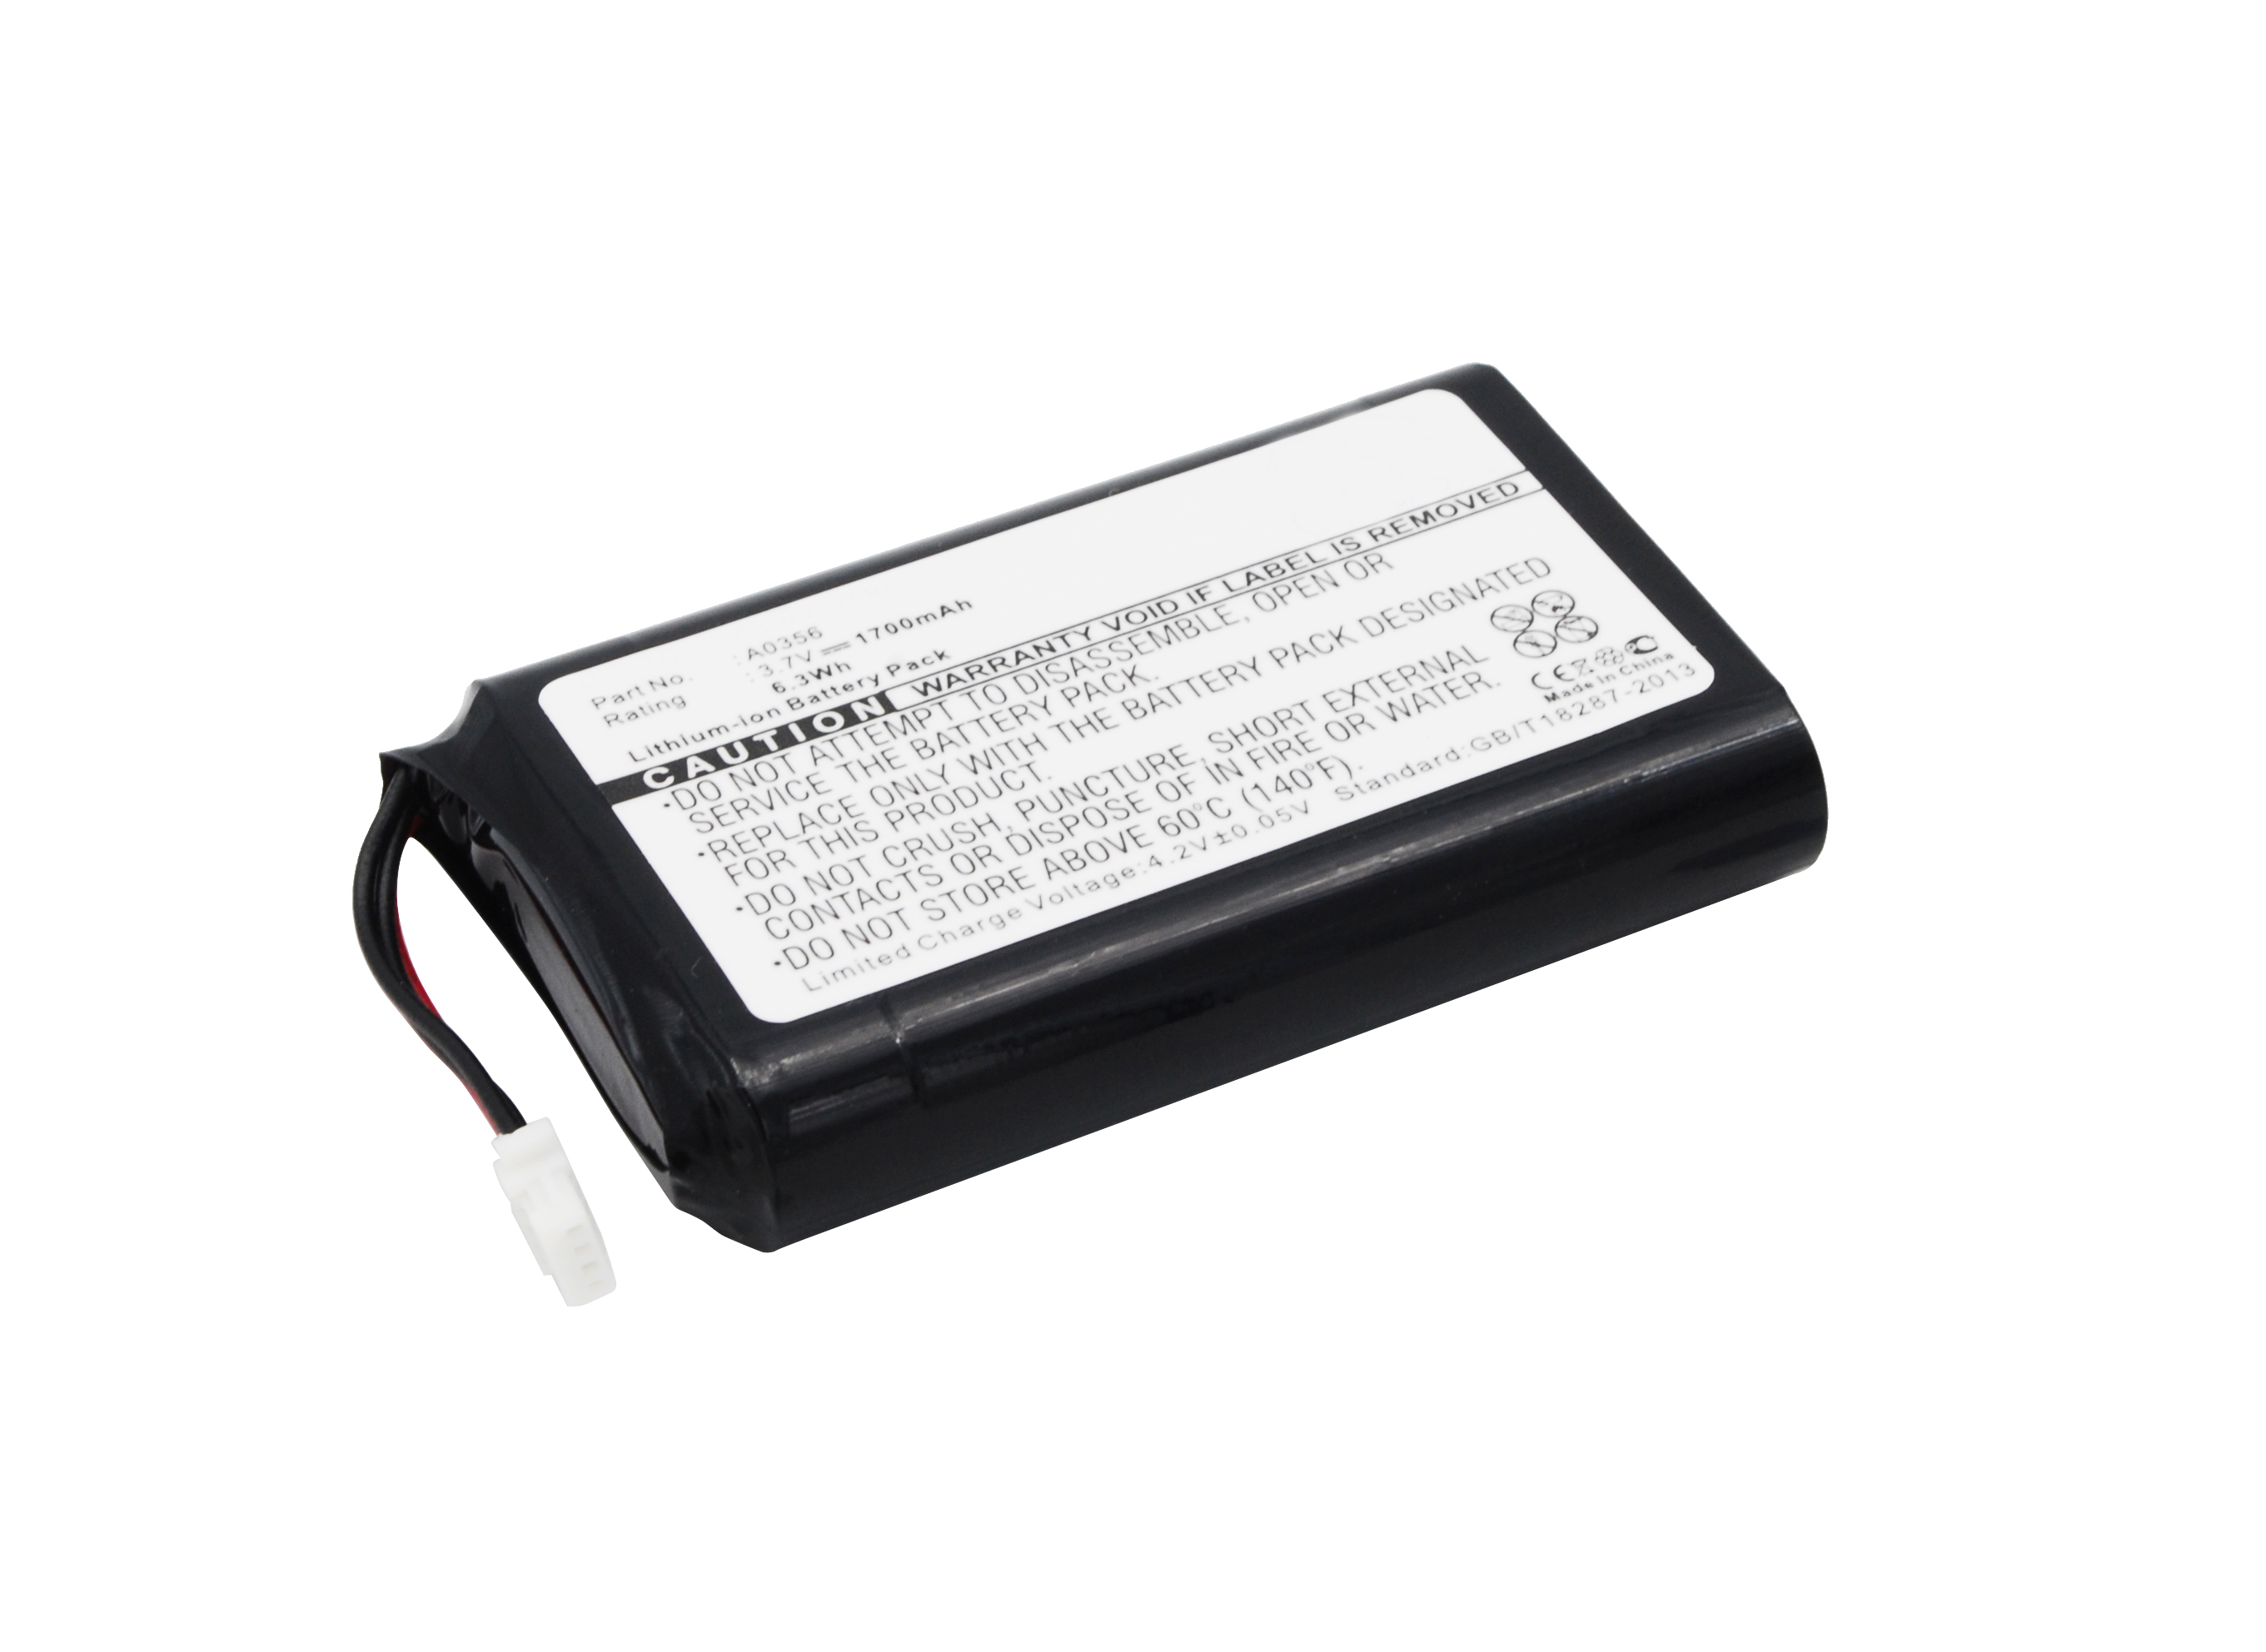 Synergy Digital Battery Compatible With Nevo A0356 Remote Control Battery - (Li-Ion, 3.7V, 1700 mAh)